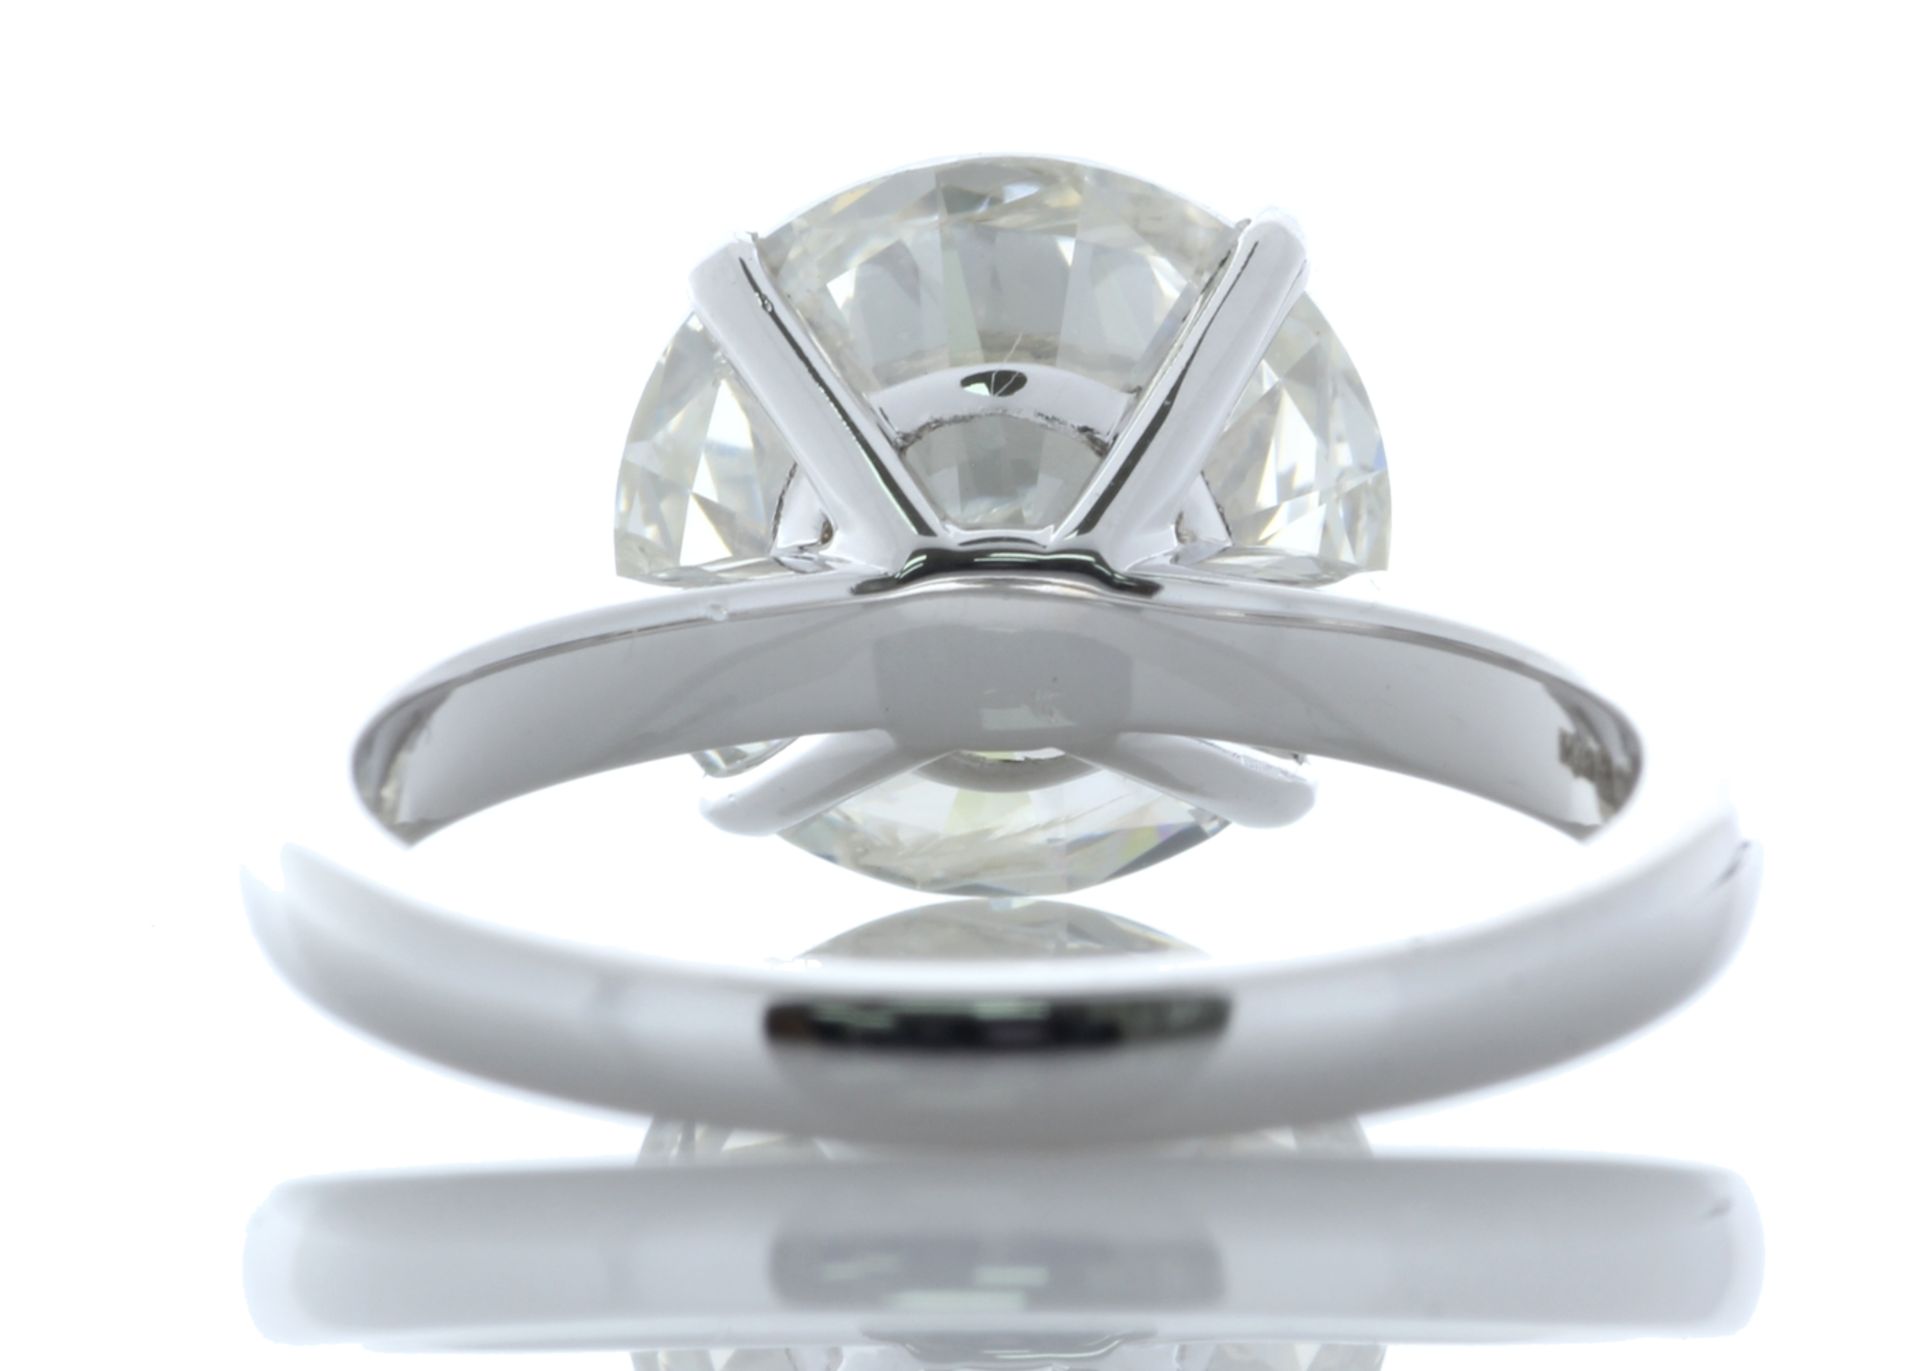 18ct White Gold Single Stone Prong Set Diamond Ring 5.07 Carats - Valued By IDI £157,500.00 - A - Image 5 of 6